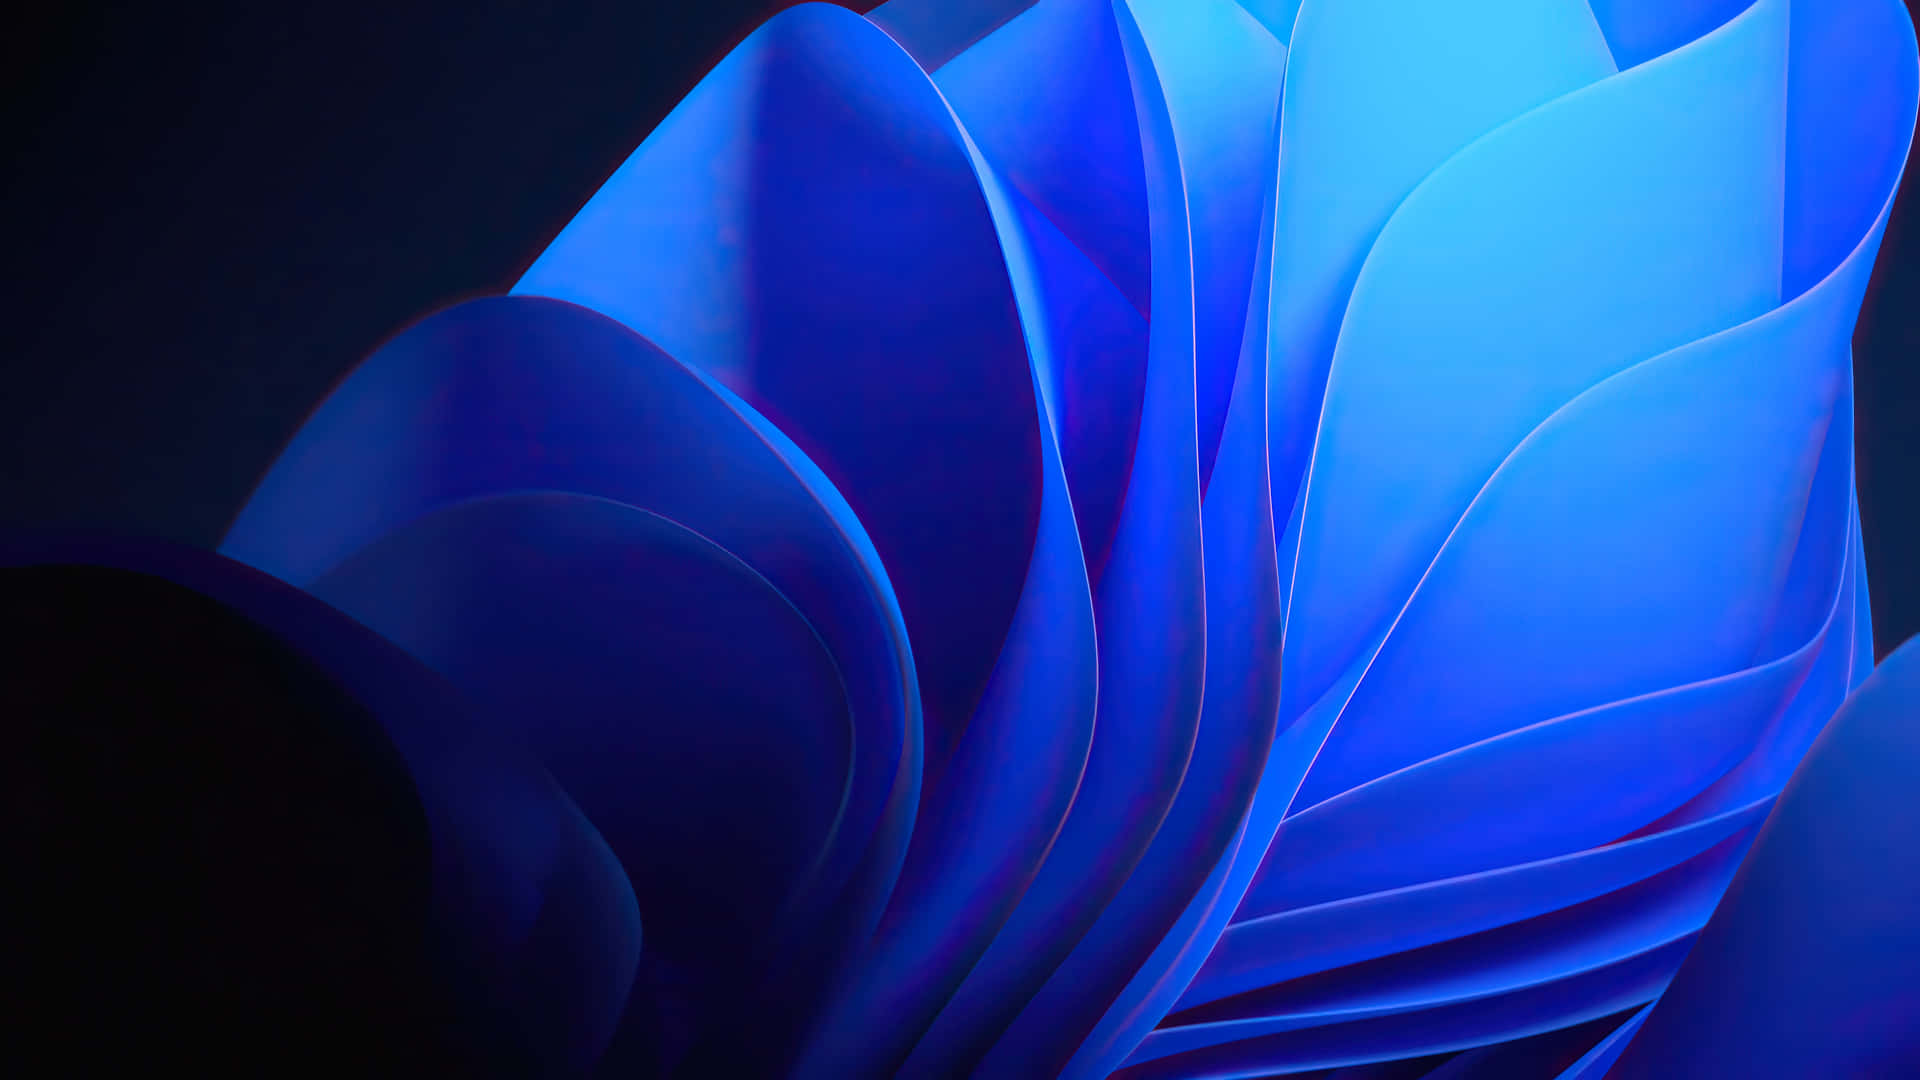 A Blue Abstract Flower With A Black Background Wallpaper